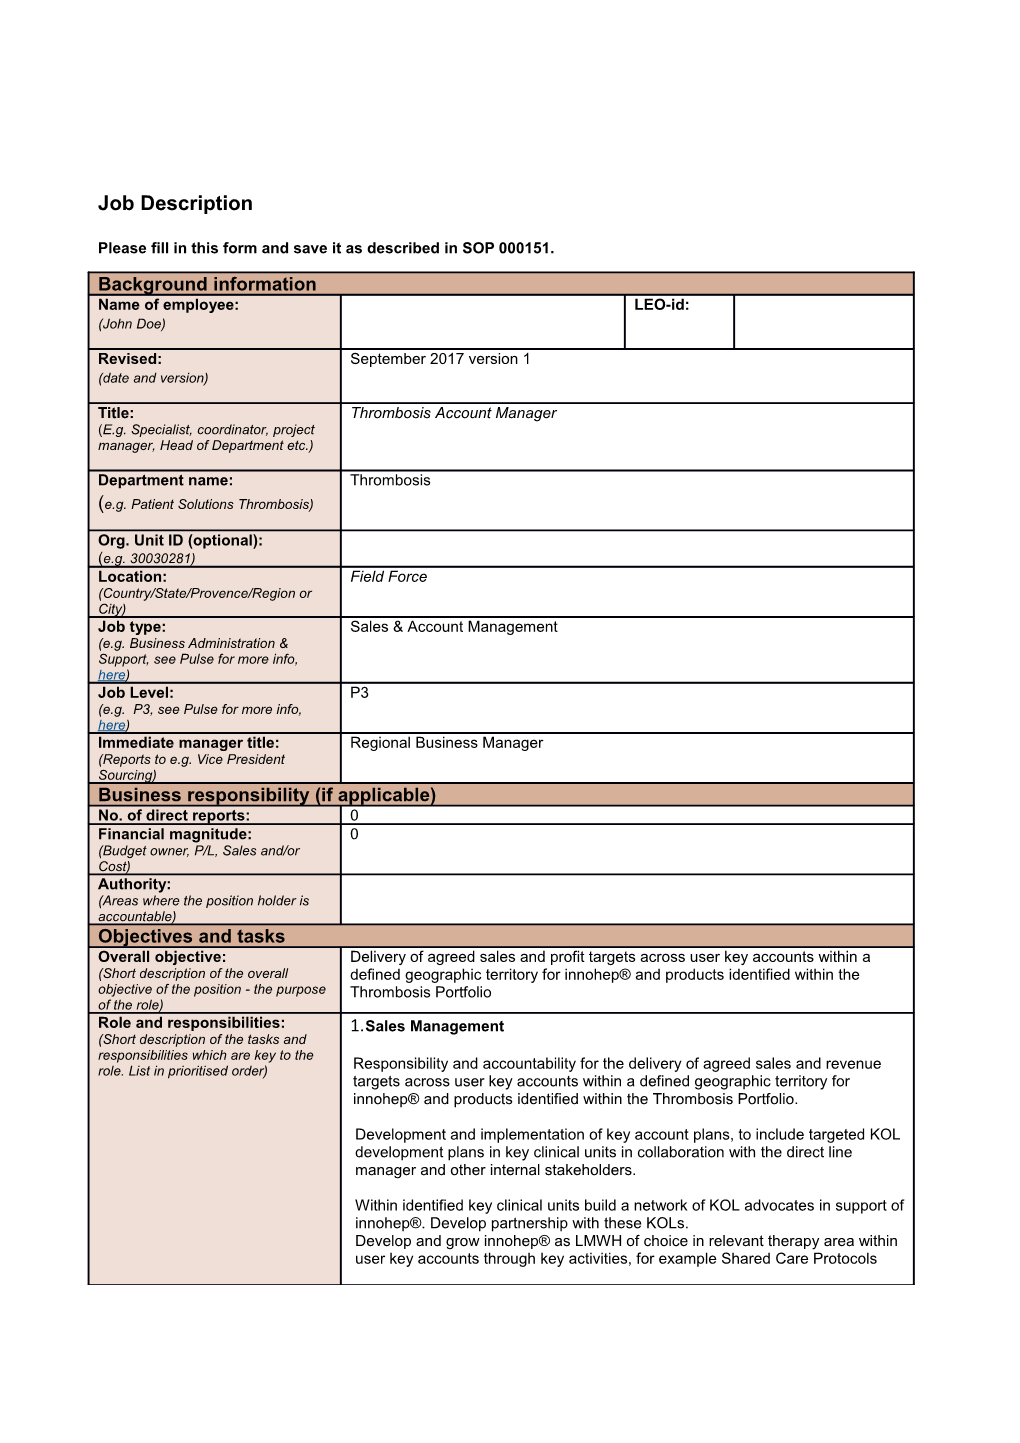 Please Fill in This Form and Save It As Described in SOP 000151